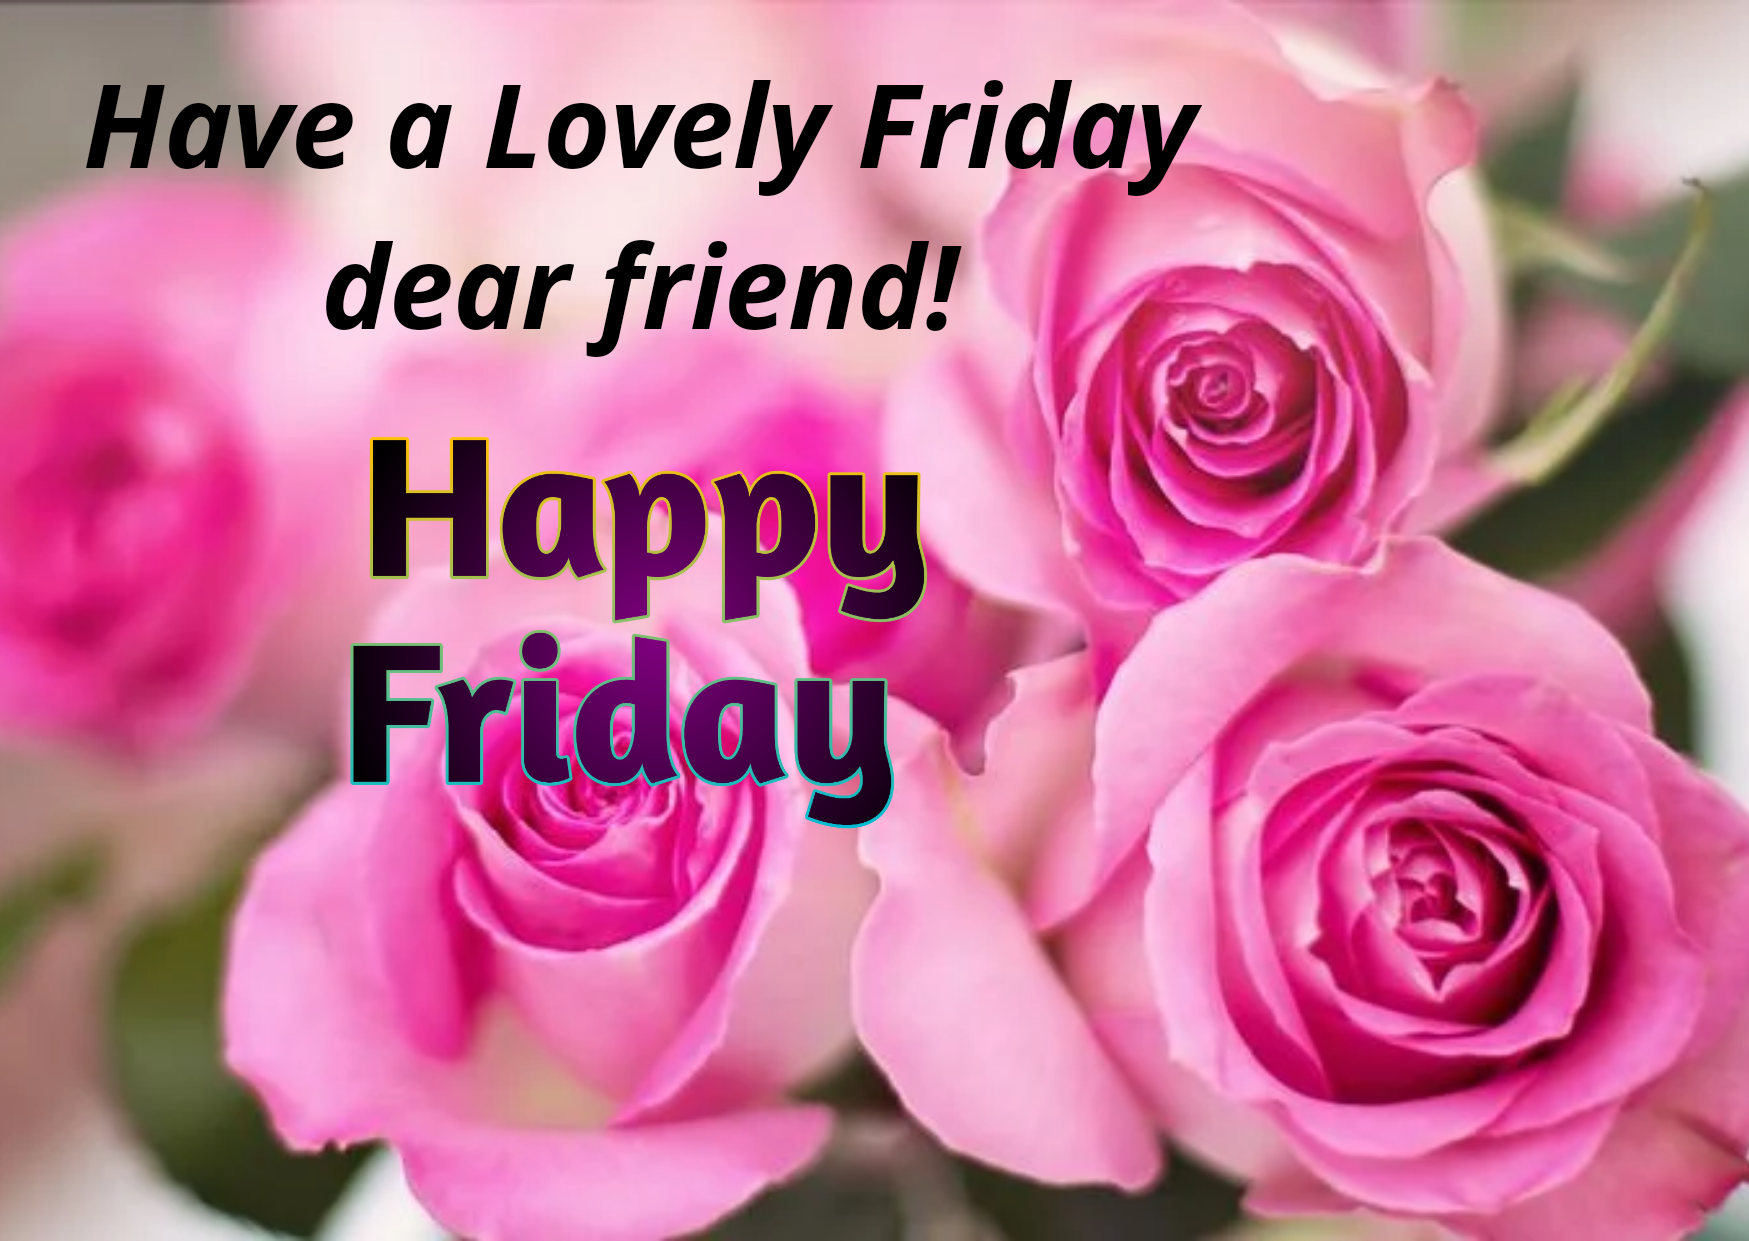 Happy Friday Wishes, Images, Wallpaper, Quotes, For Whatsapp, Free download,